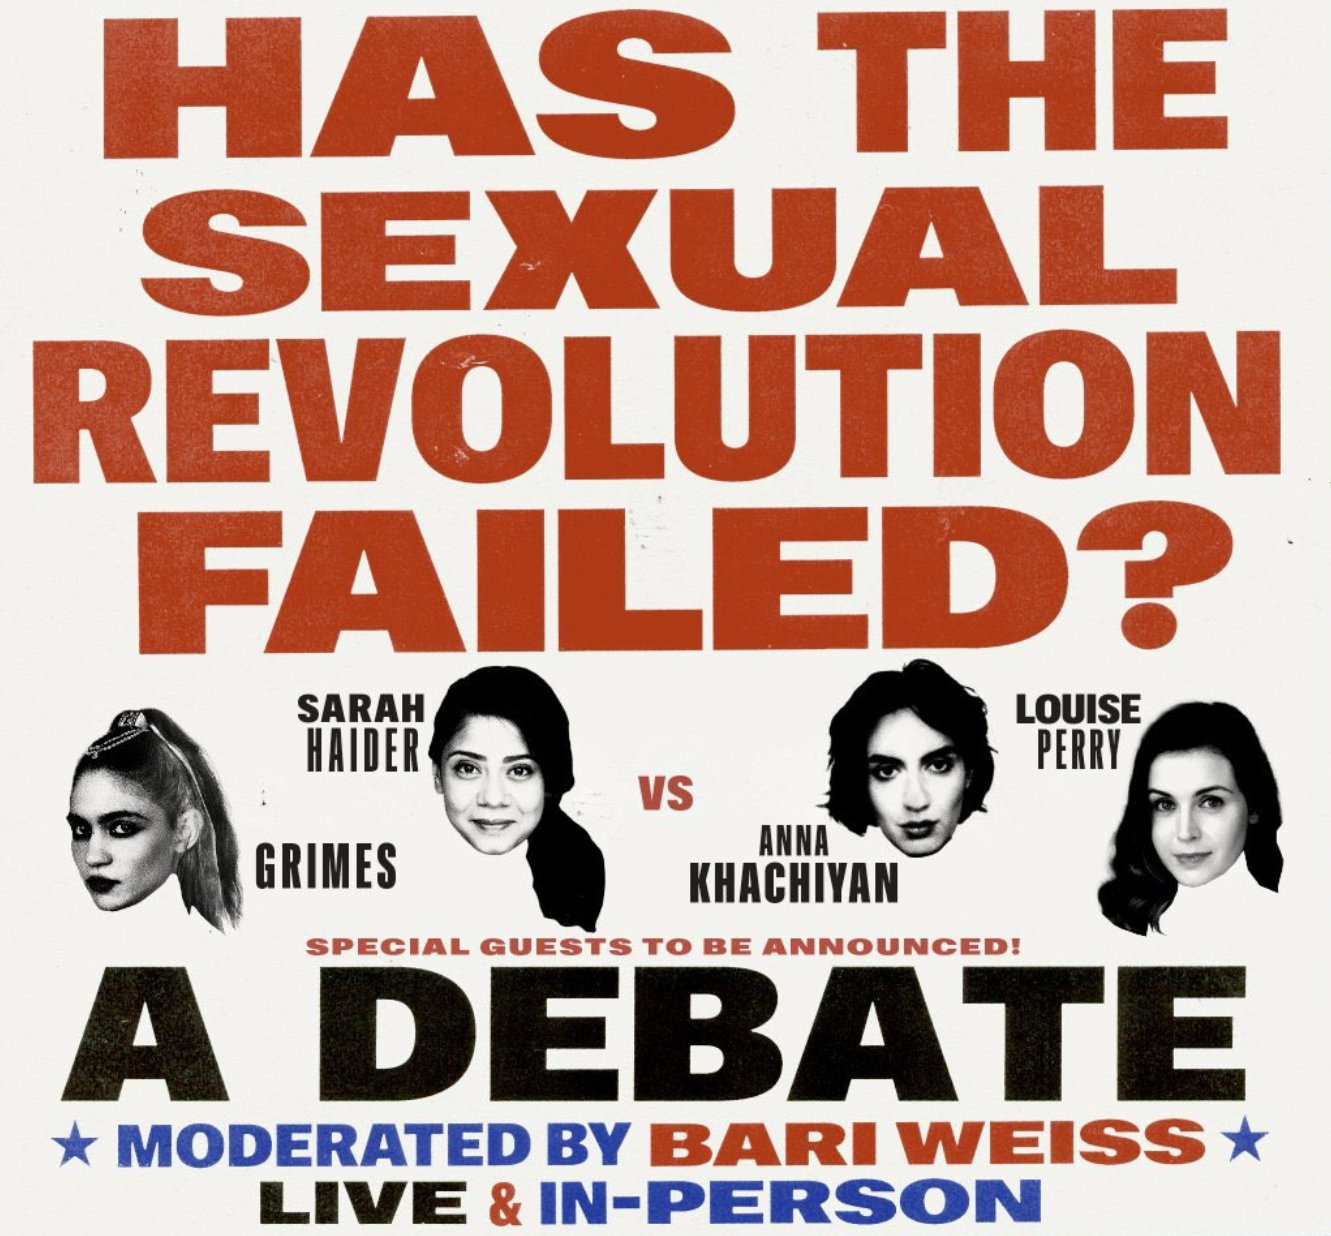 poster that says has the sexual revolution failed? underneath grimes and sarah haider vs. anna khachiyan and louise perry. then special guests to be announced! a debate moderated by Bari Weiss, live & in-person